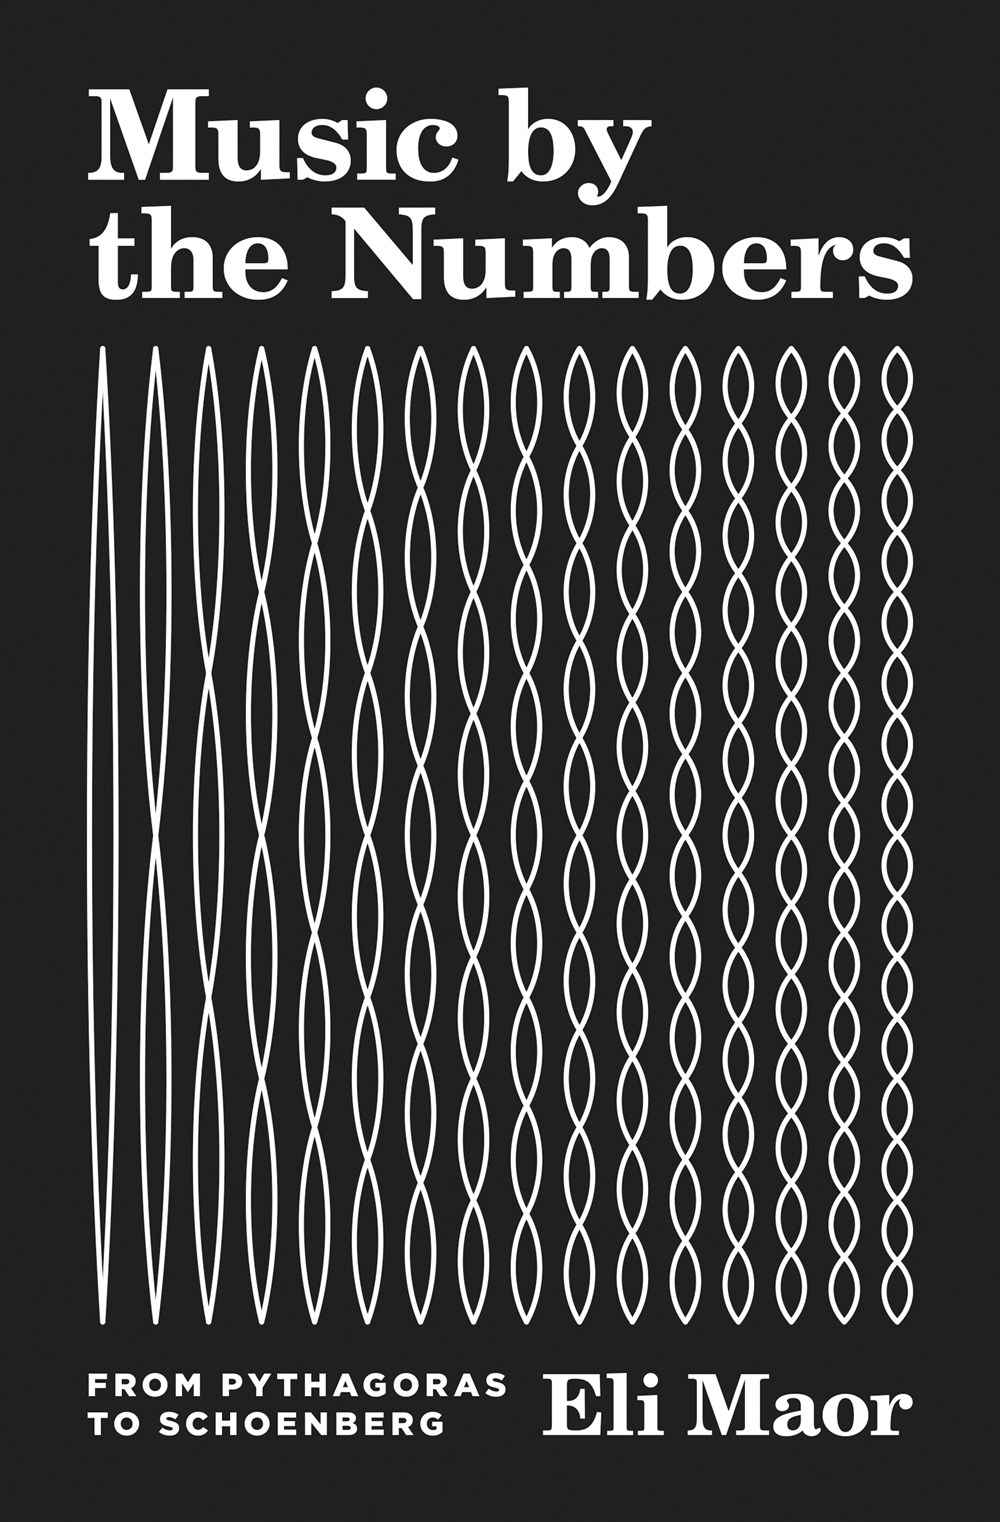 Music by the numbers